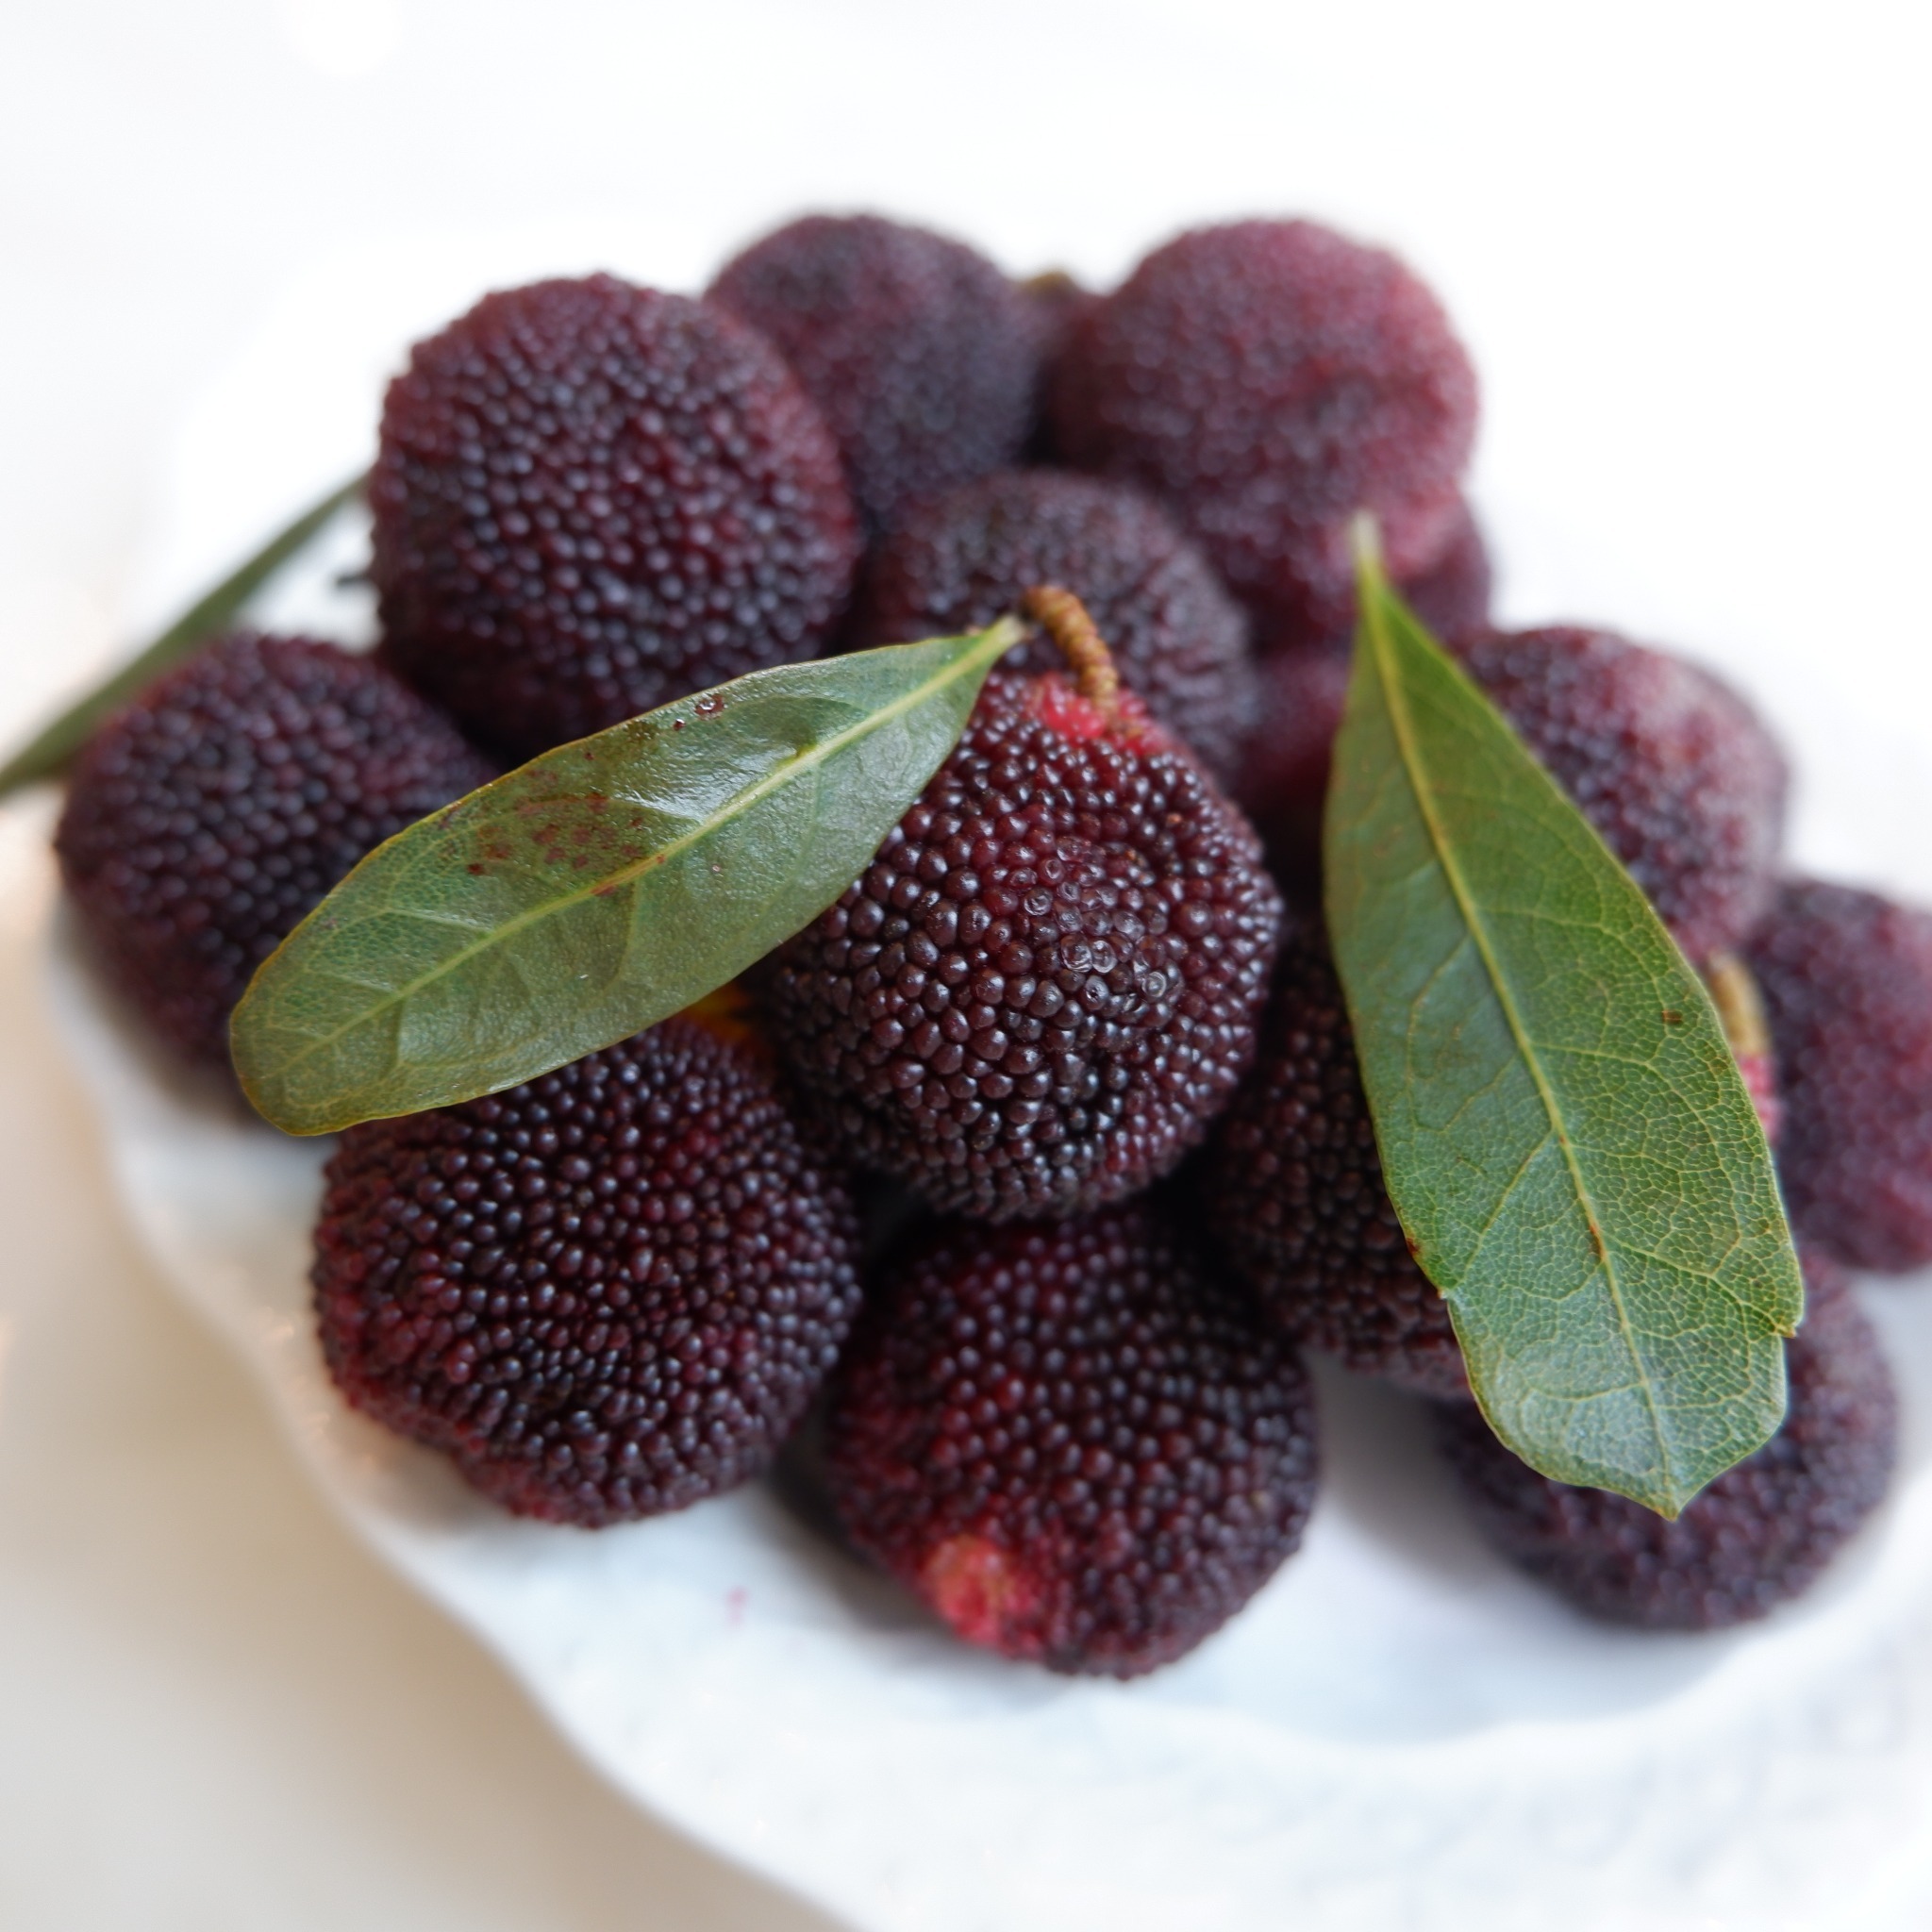 Myrica rubra is also called yangmei, yamamomo, Chinese bayberry, Japanese bayberry, red bayberry, yumberry, waxberry, or Chinese strawberry.